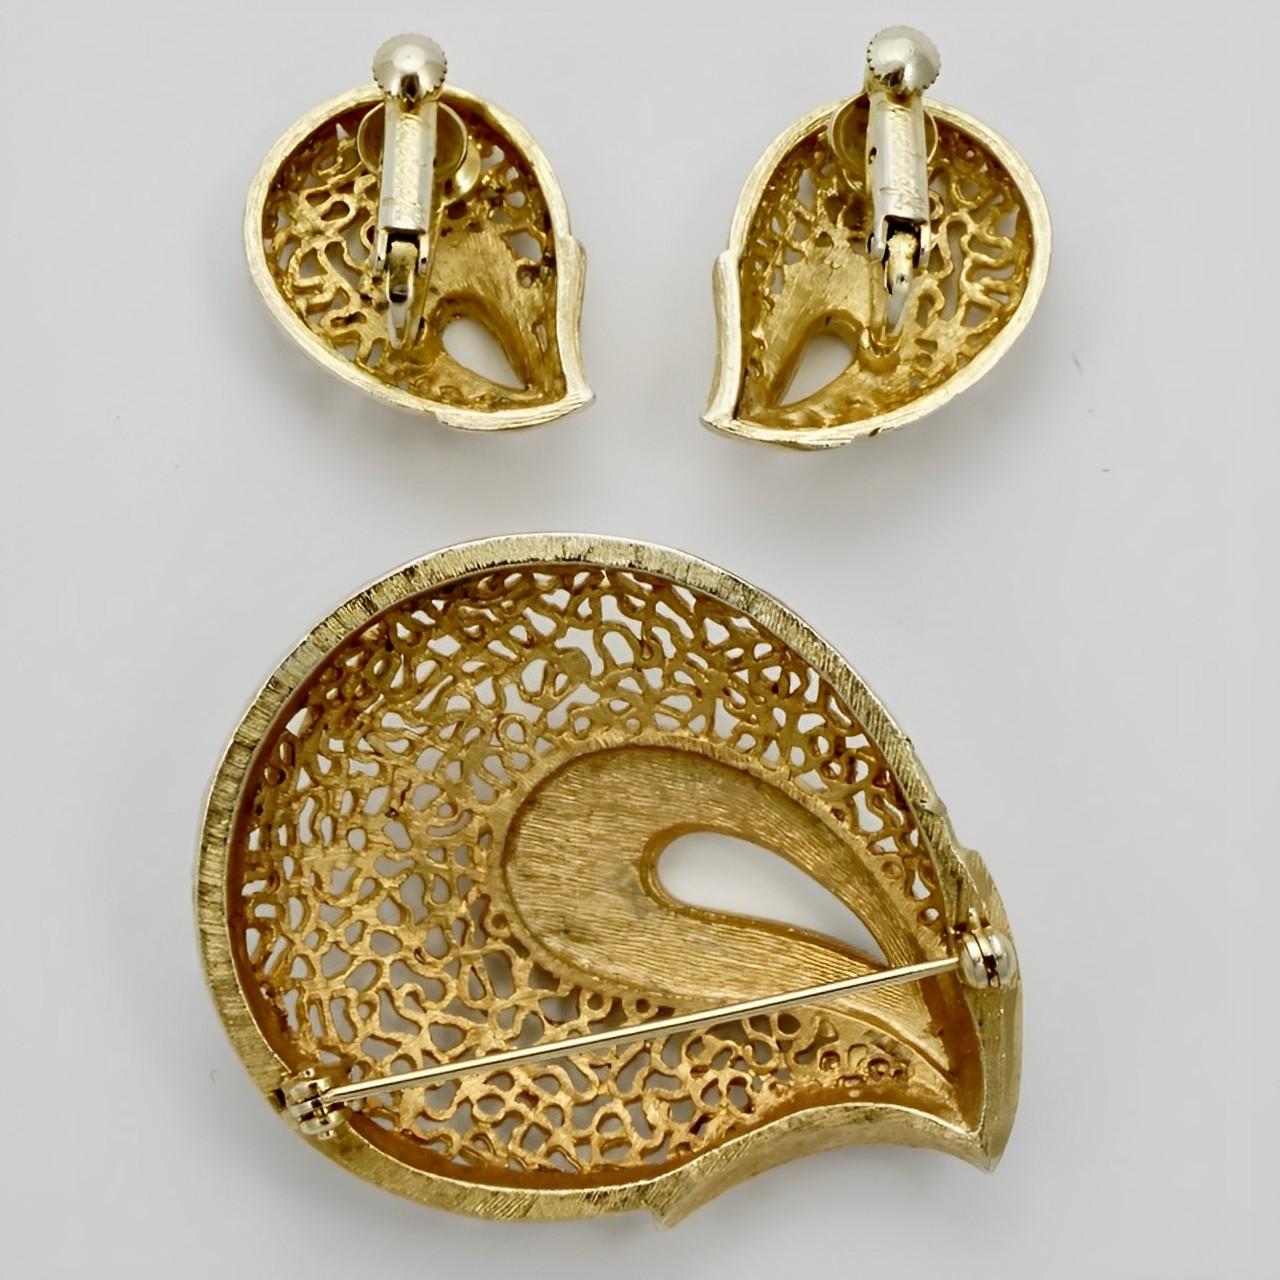 Jewelcraft Gold Plated Textured Brooch and Earrings with Rhinestones circa 1960s For Sale 1